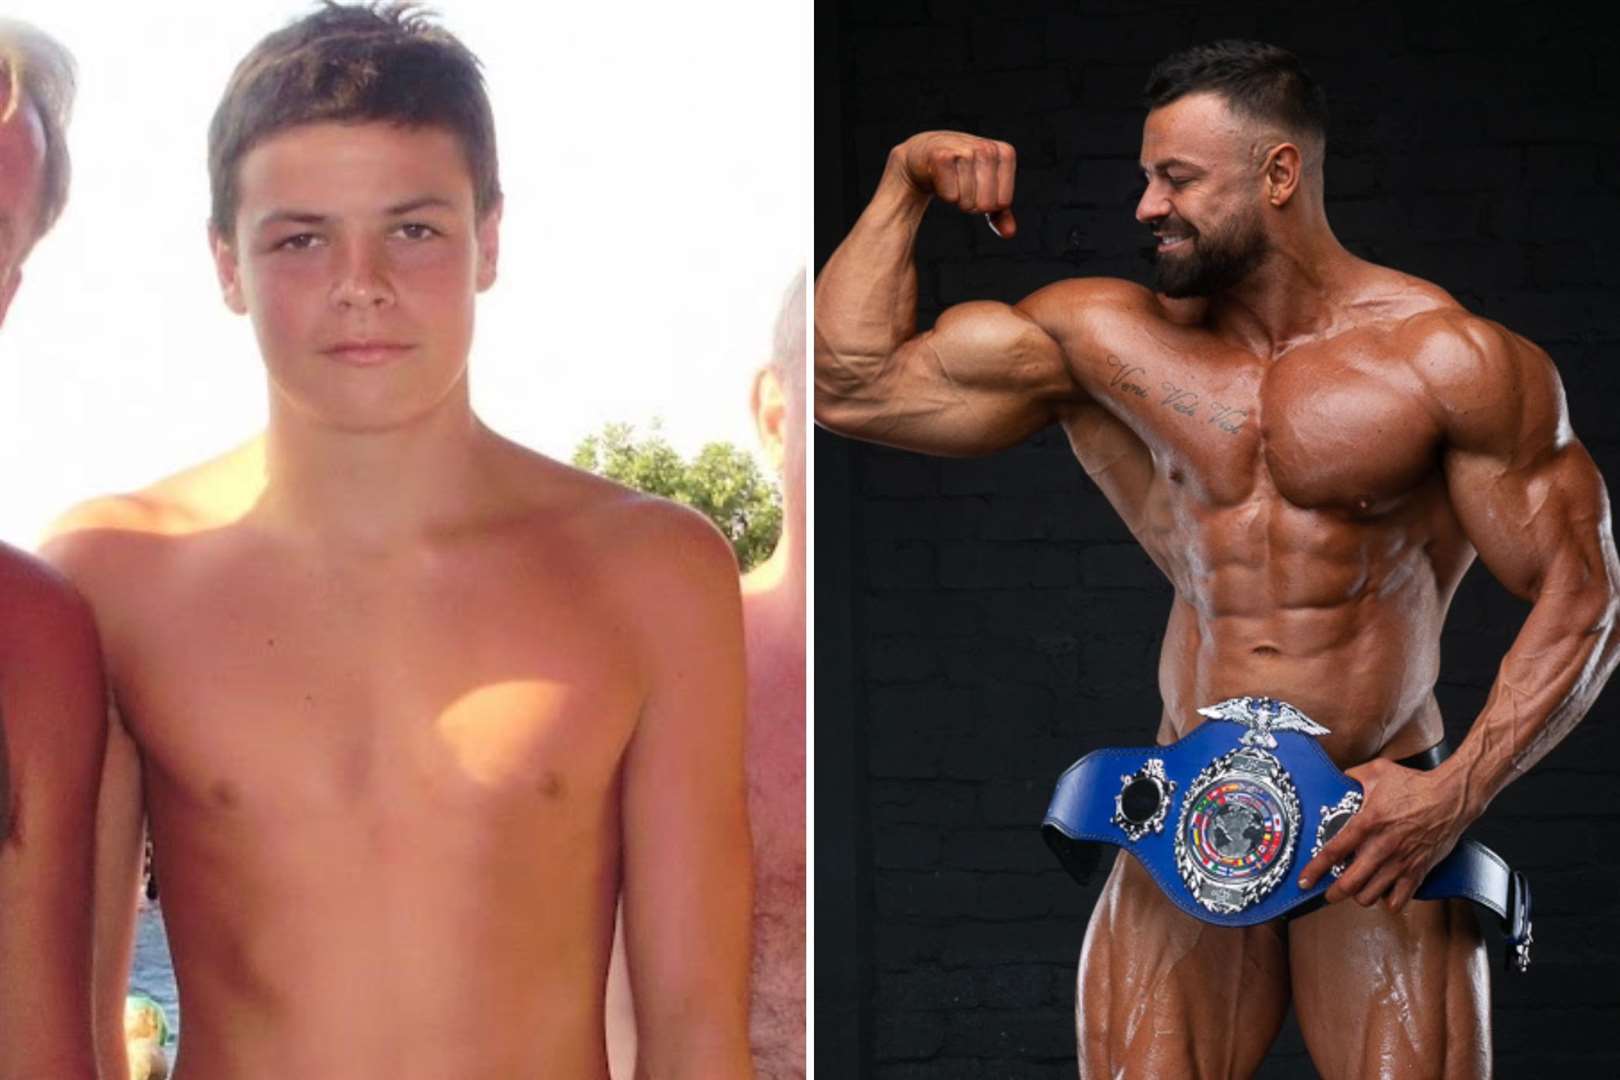 Tom Thorman, from Whitstable, before and after he bulked up. Picture: Thomas Thorman